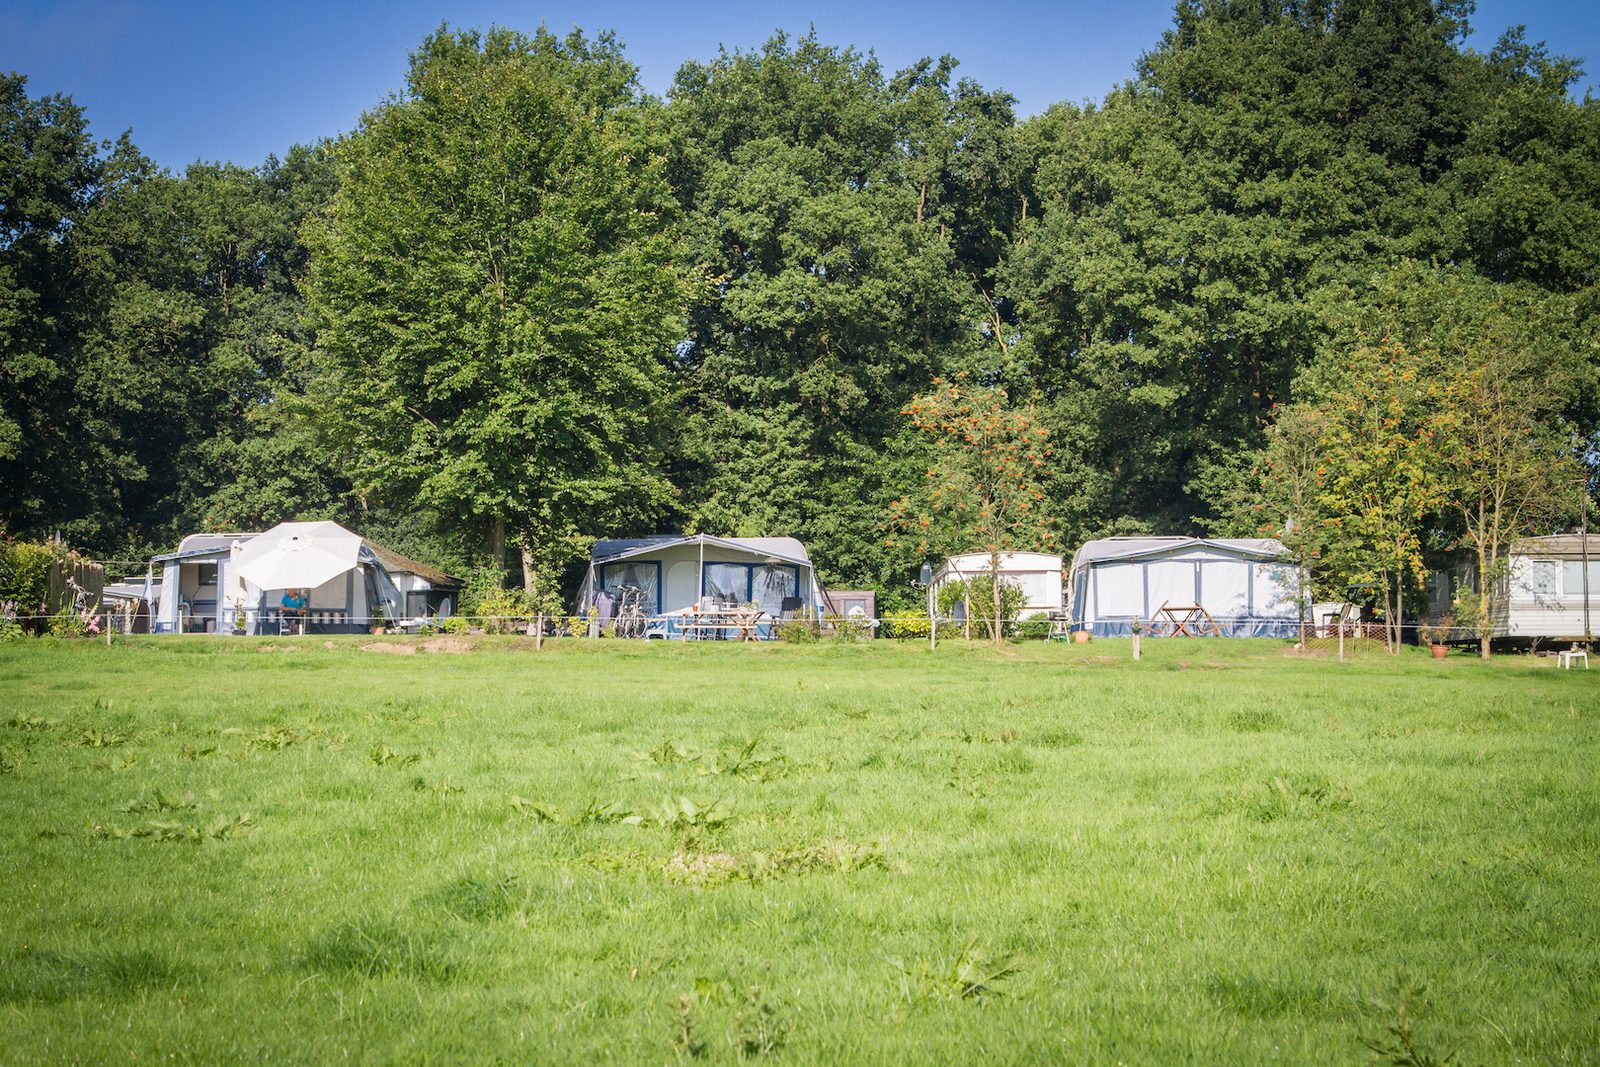 Camping Tubbergen